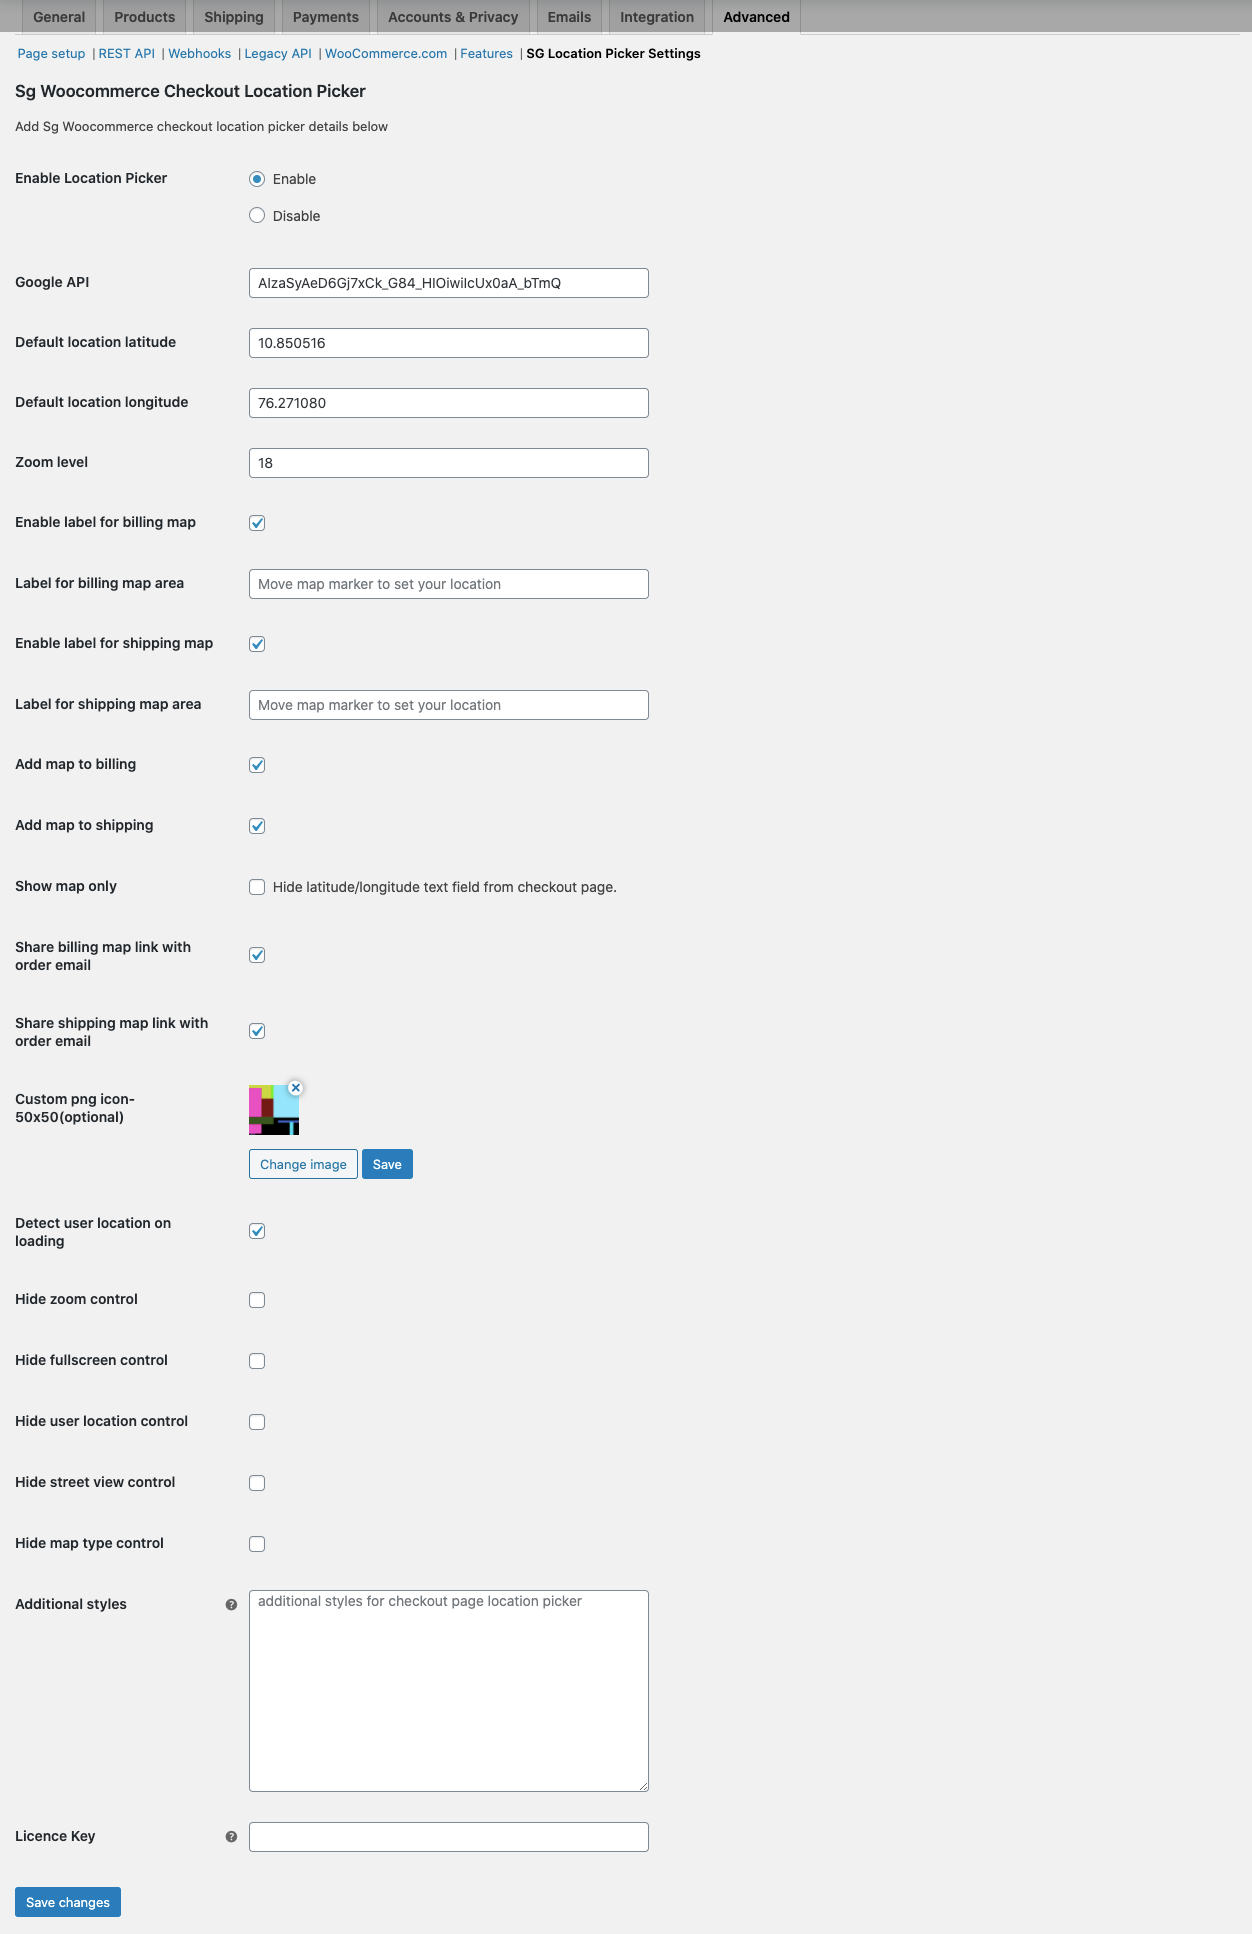 sg woocommerce checkout location picker settings page